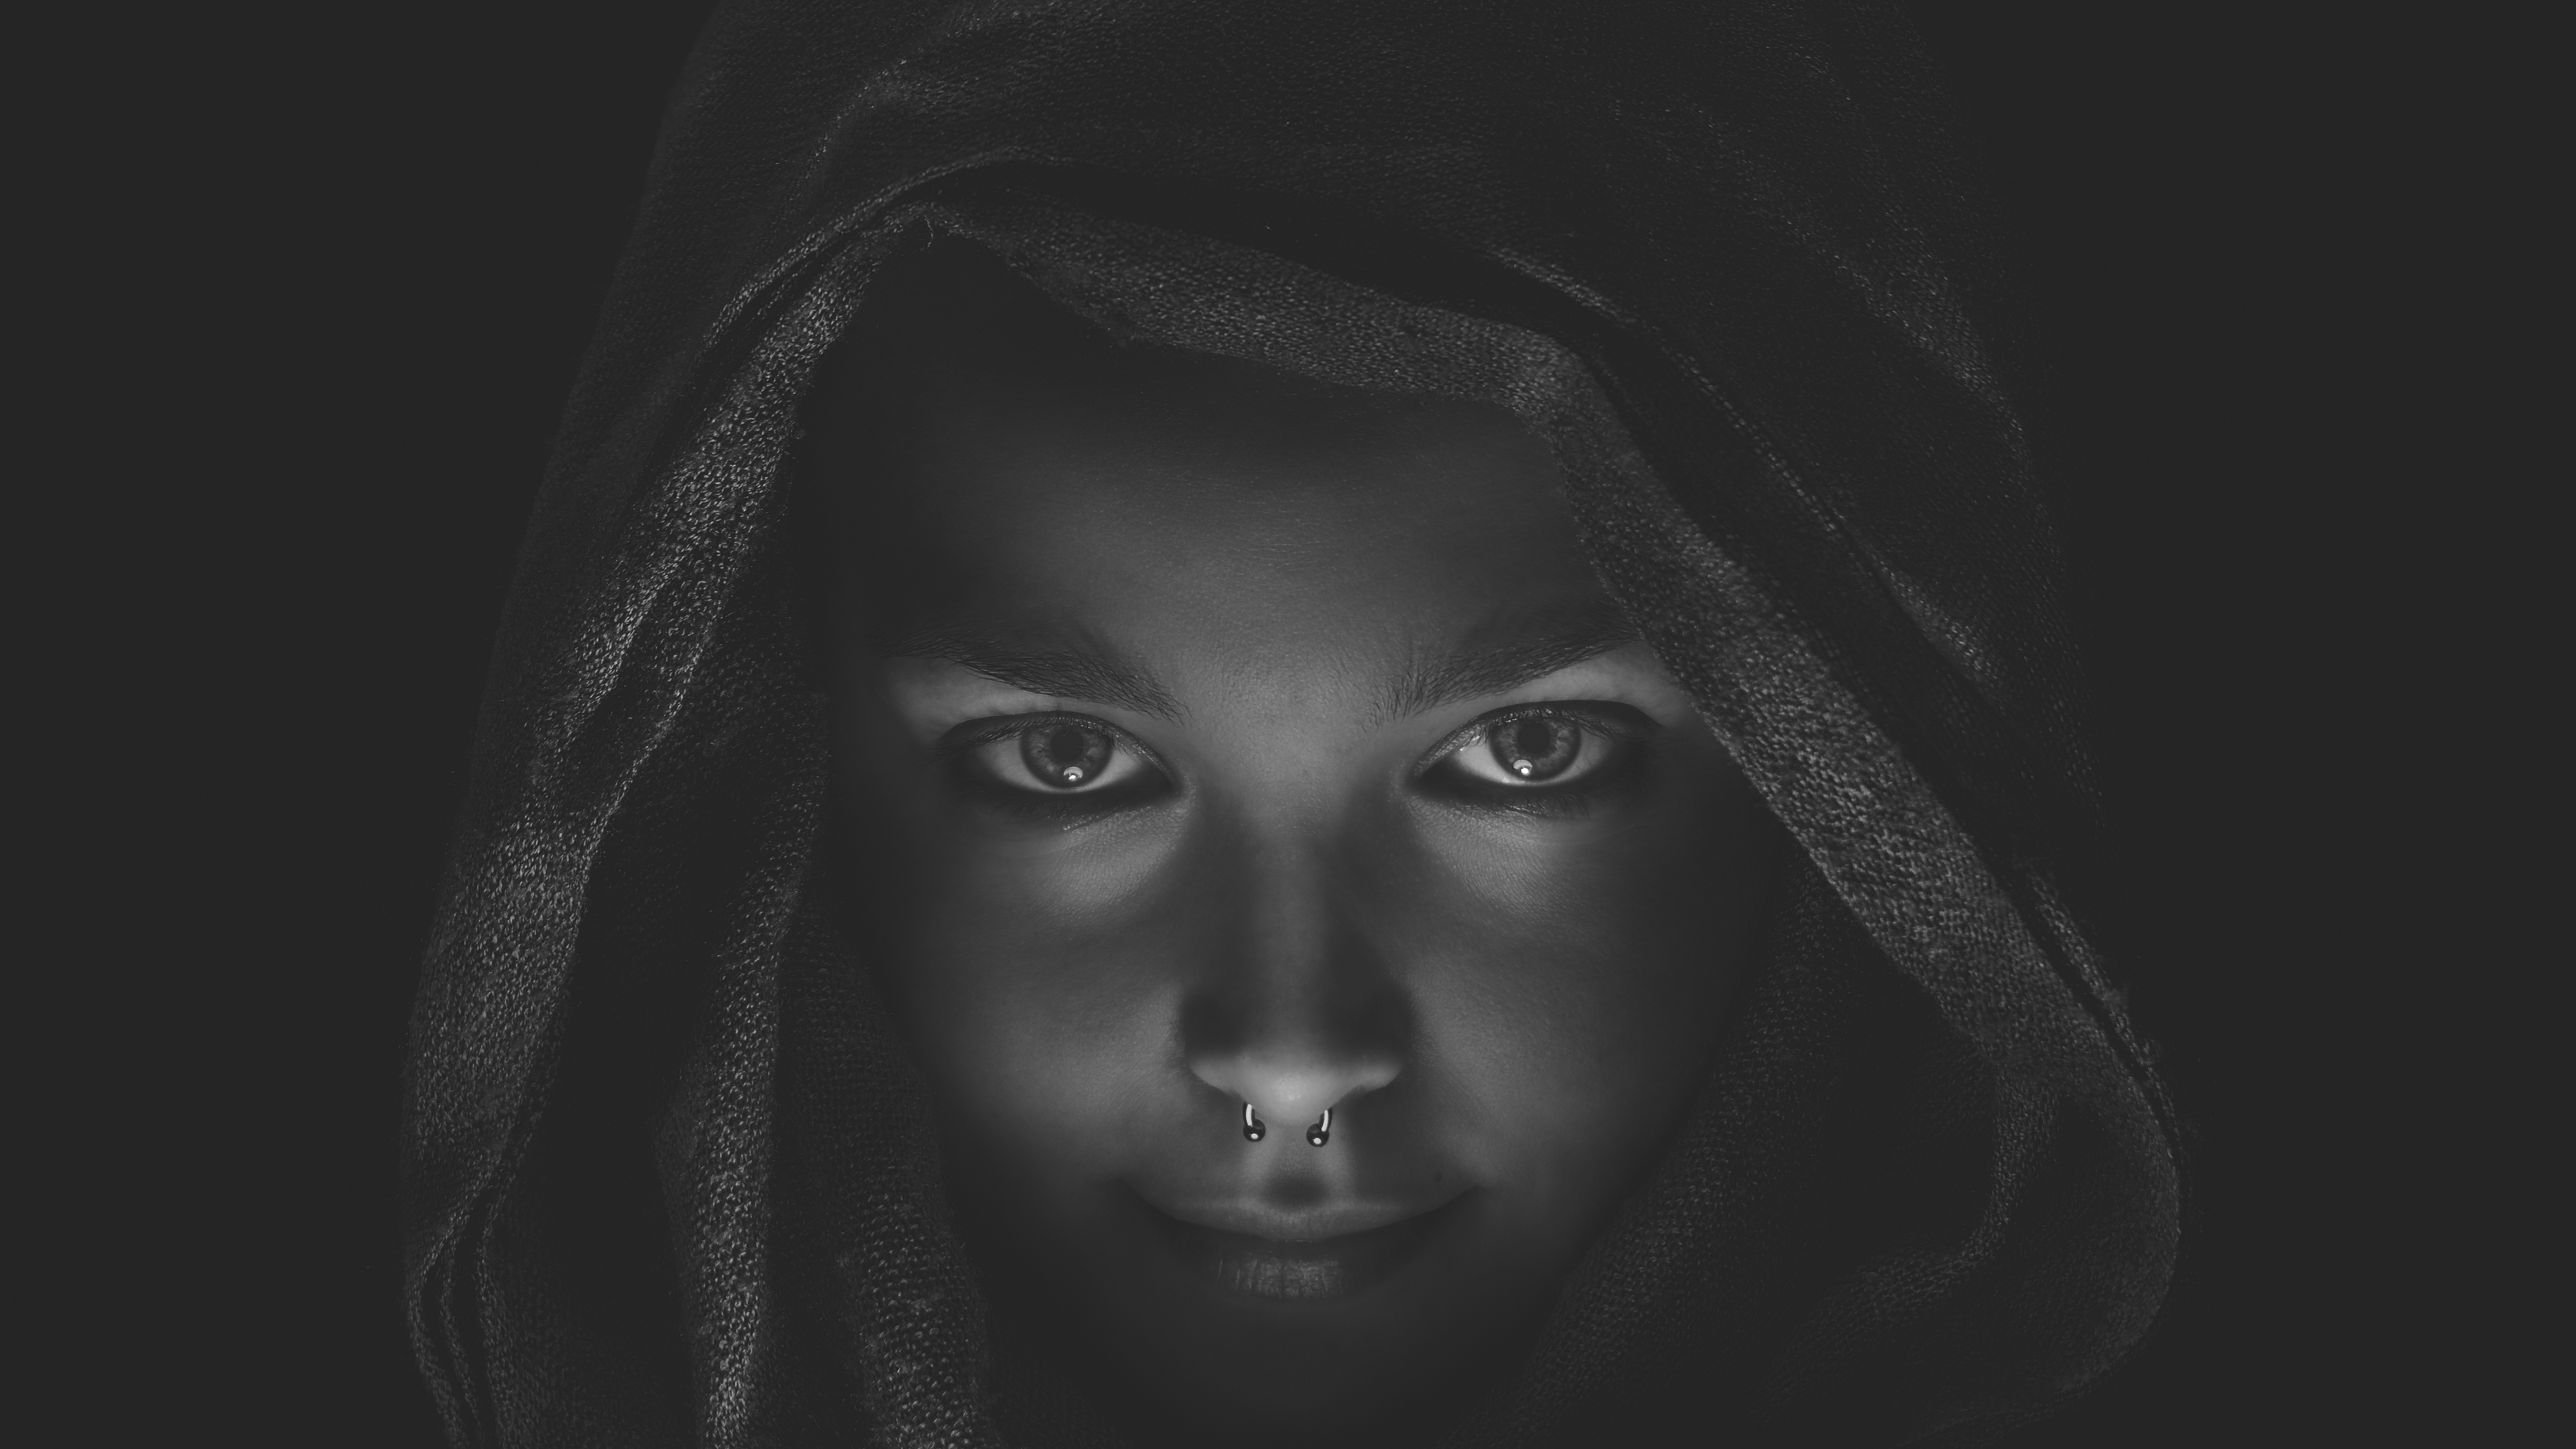 Black Amp White Face Gothic Piercing Stare Woman 6000x3376